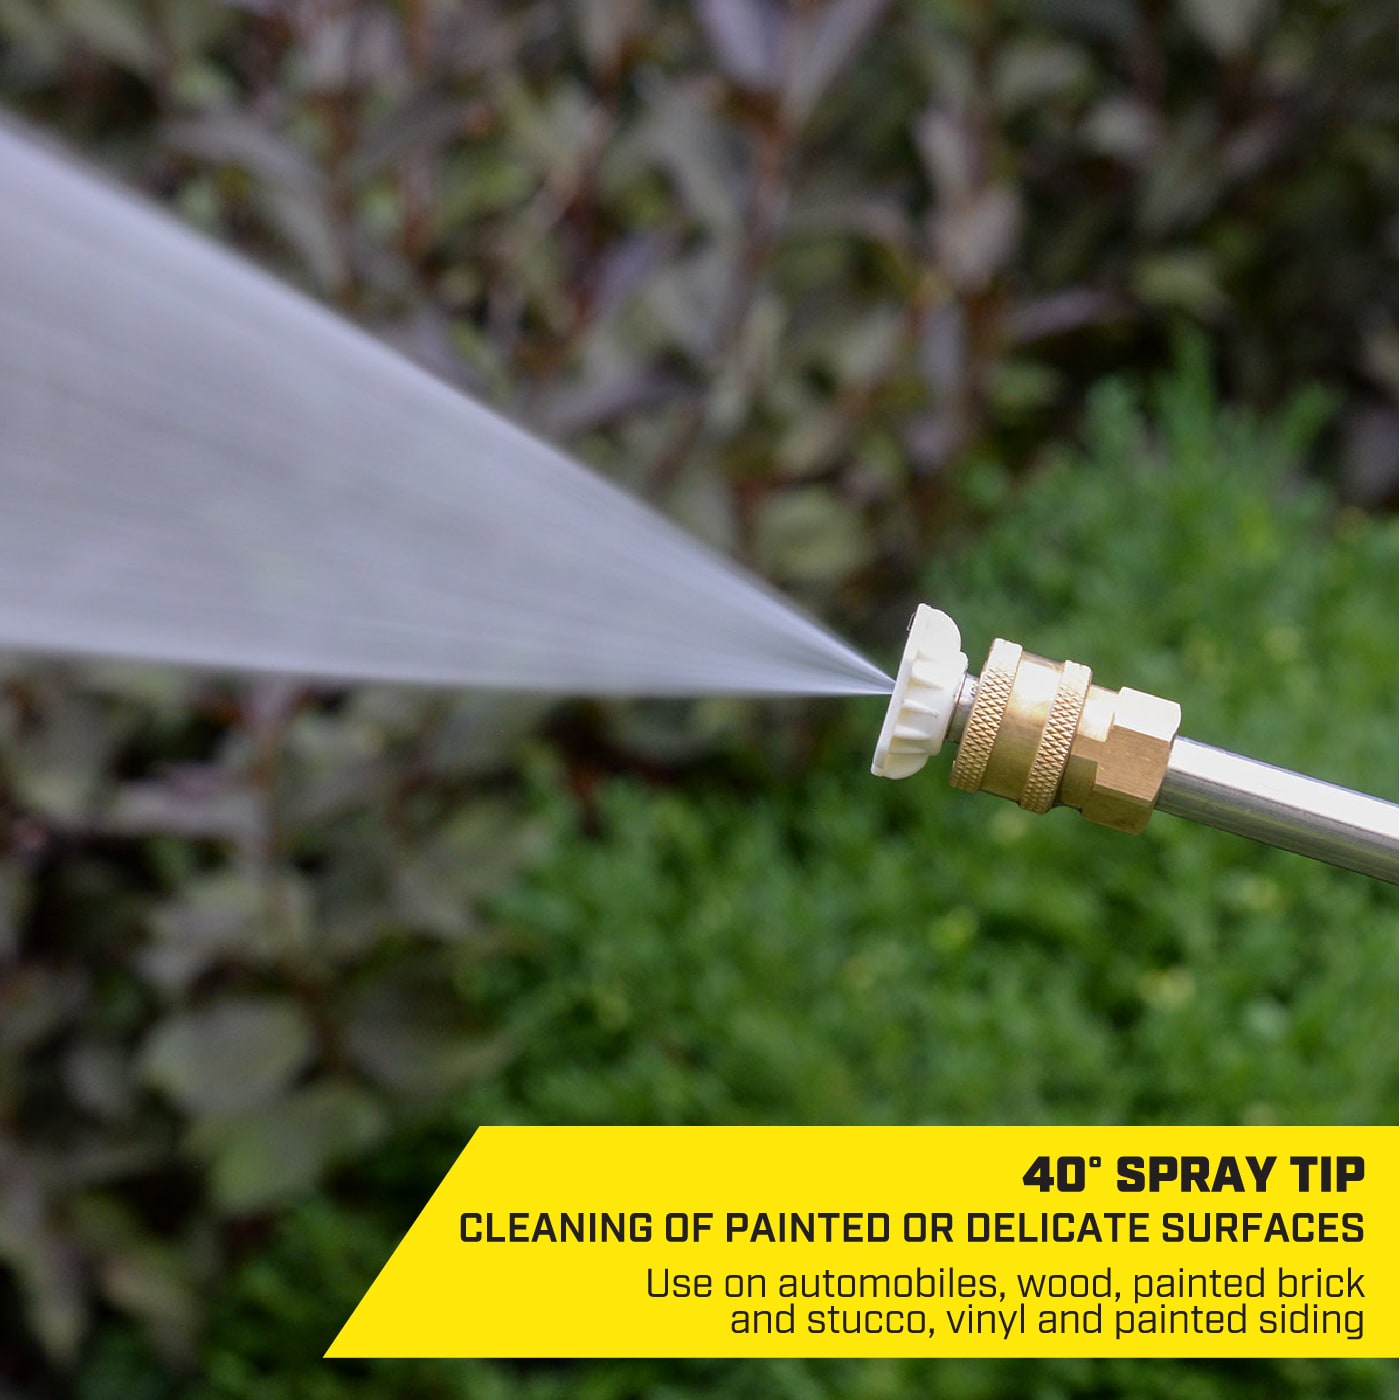 Spray tips Pressure Washers & Accessories at